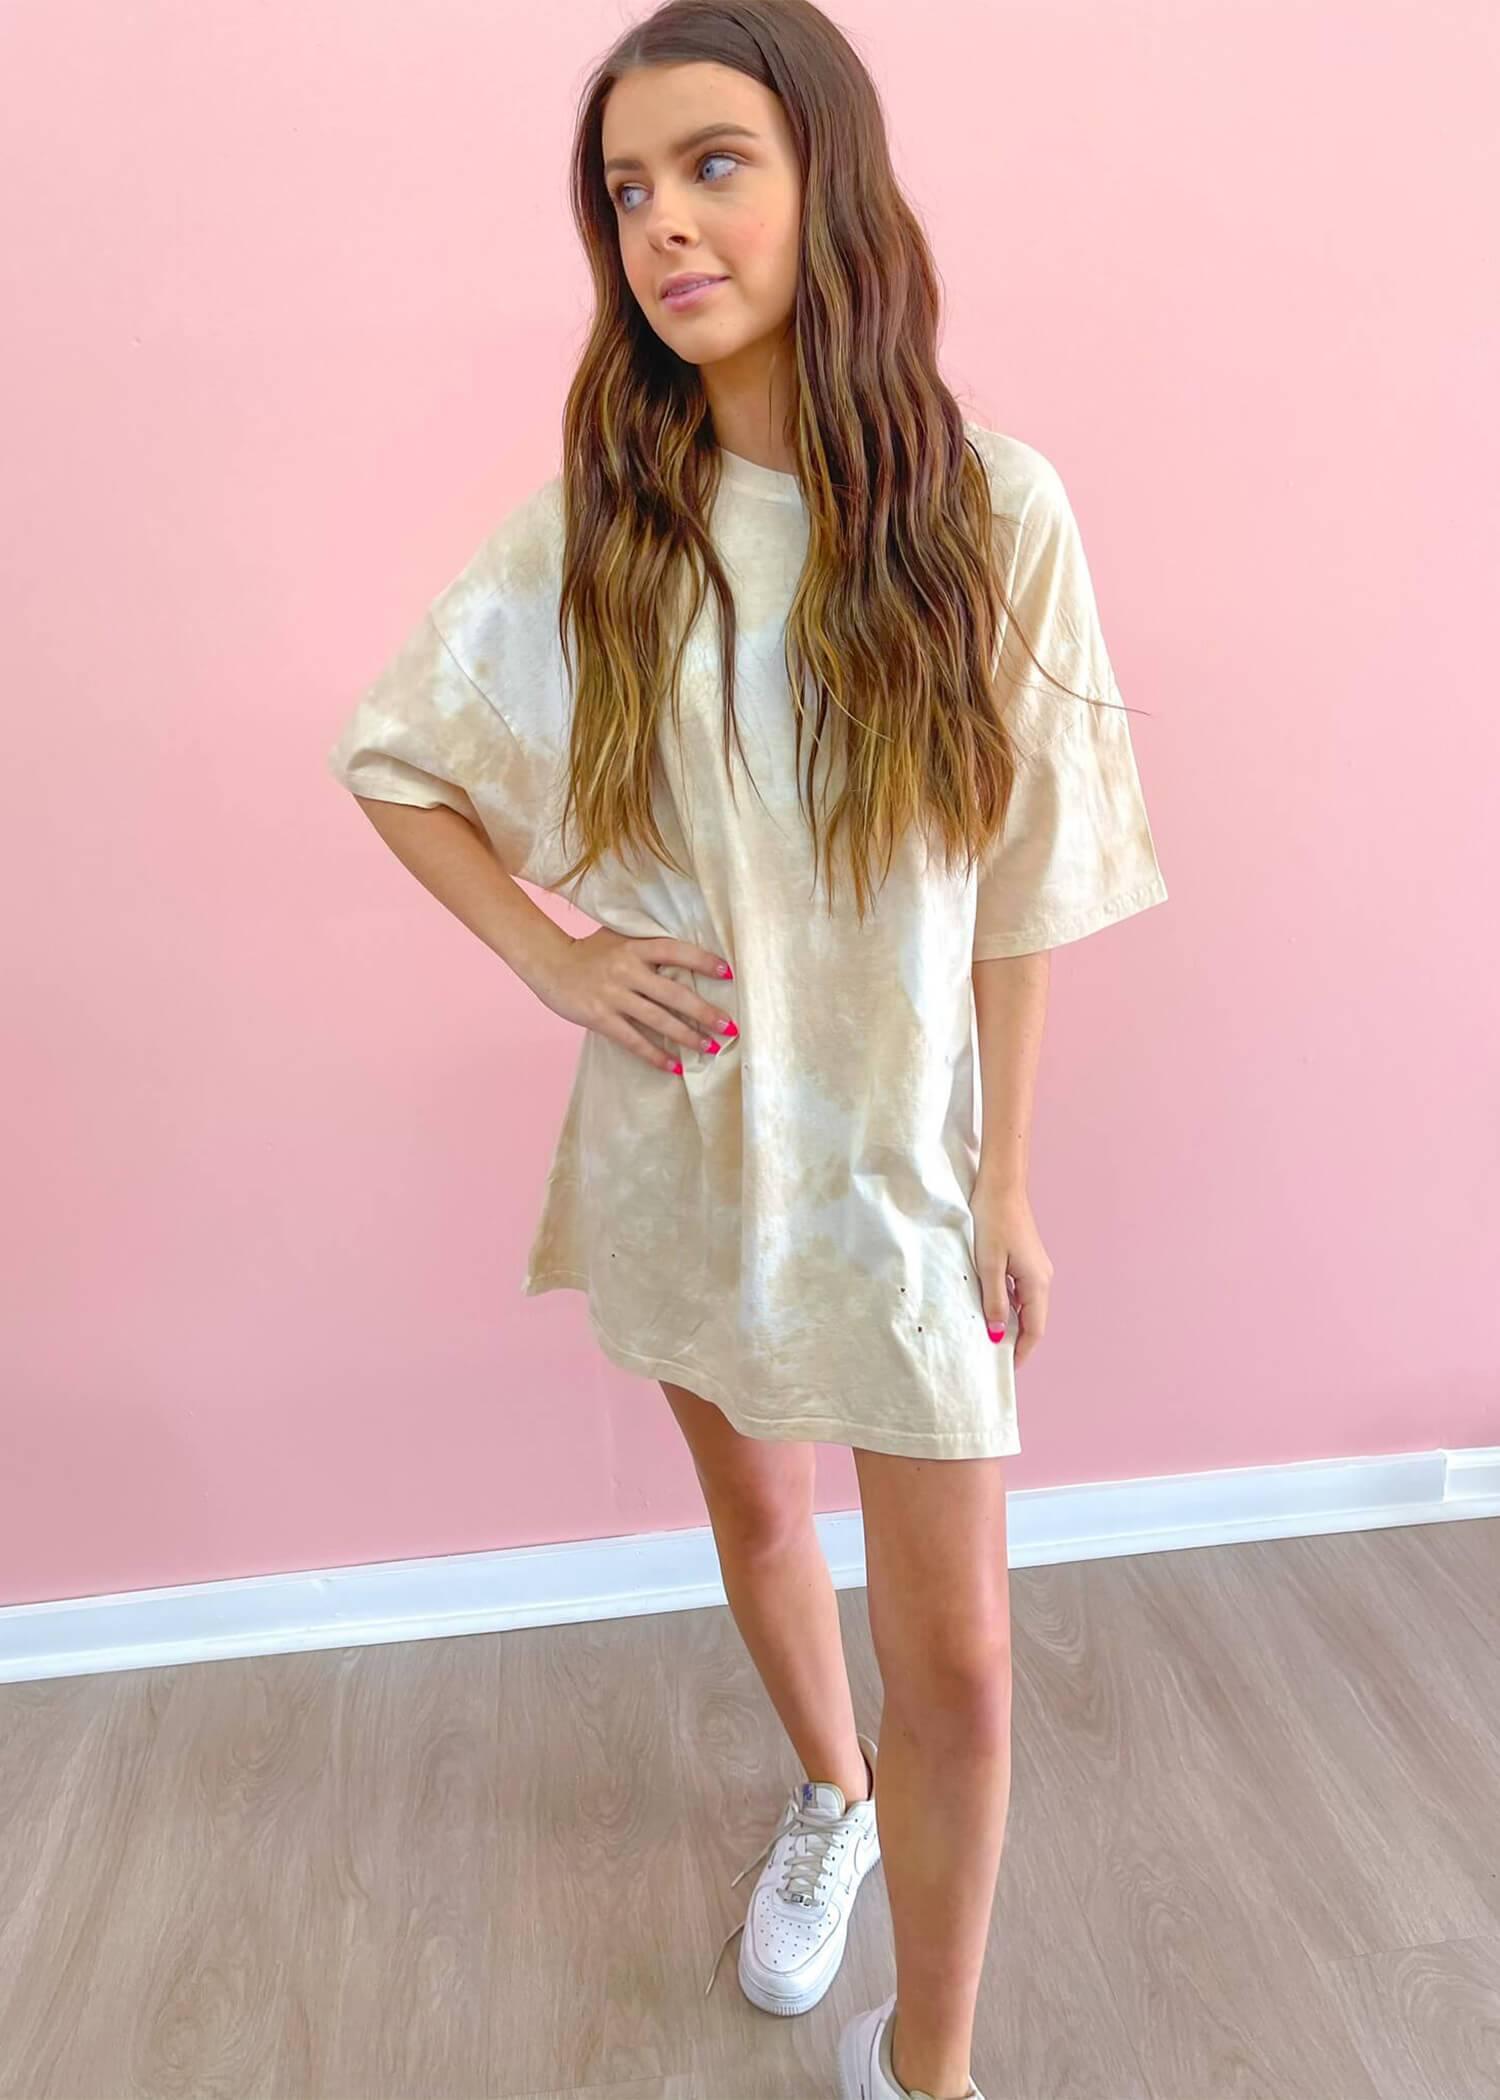 On The Move Oversized T-Shirt Dress - Tie Bone Cream Tops MerciGrace Boutique.